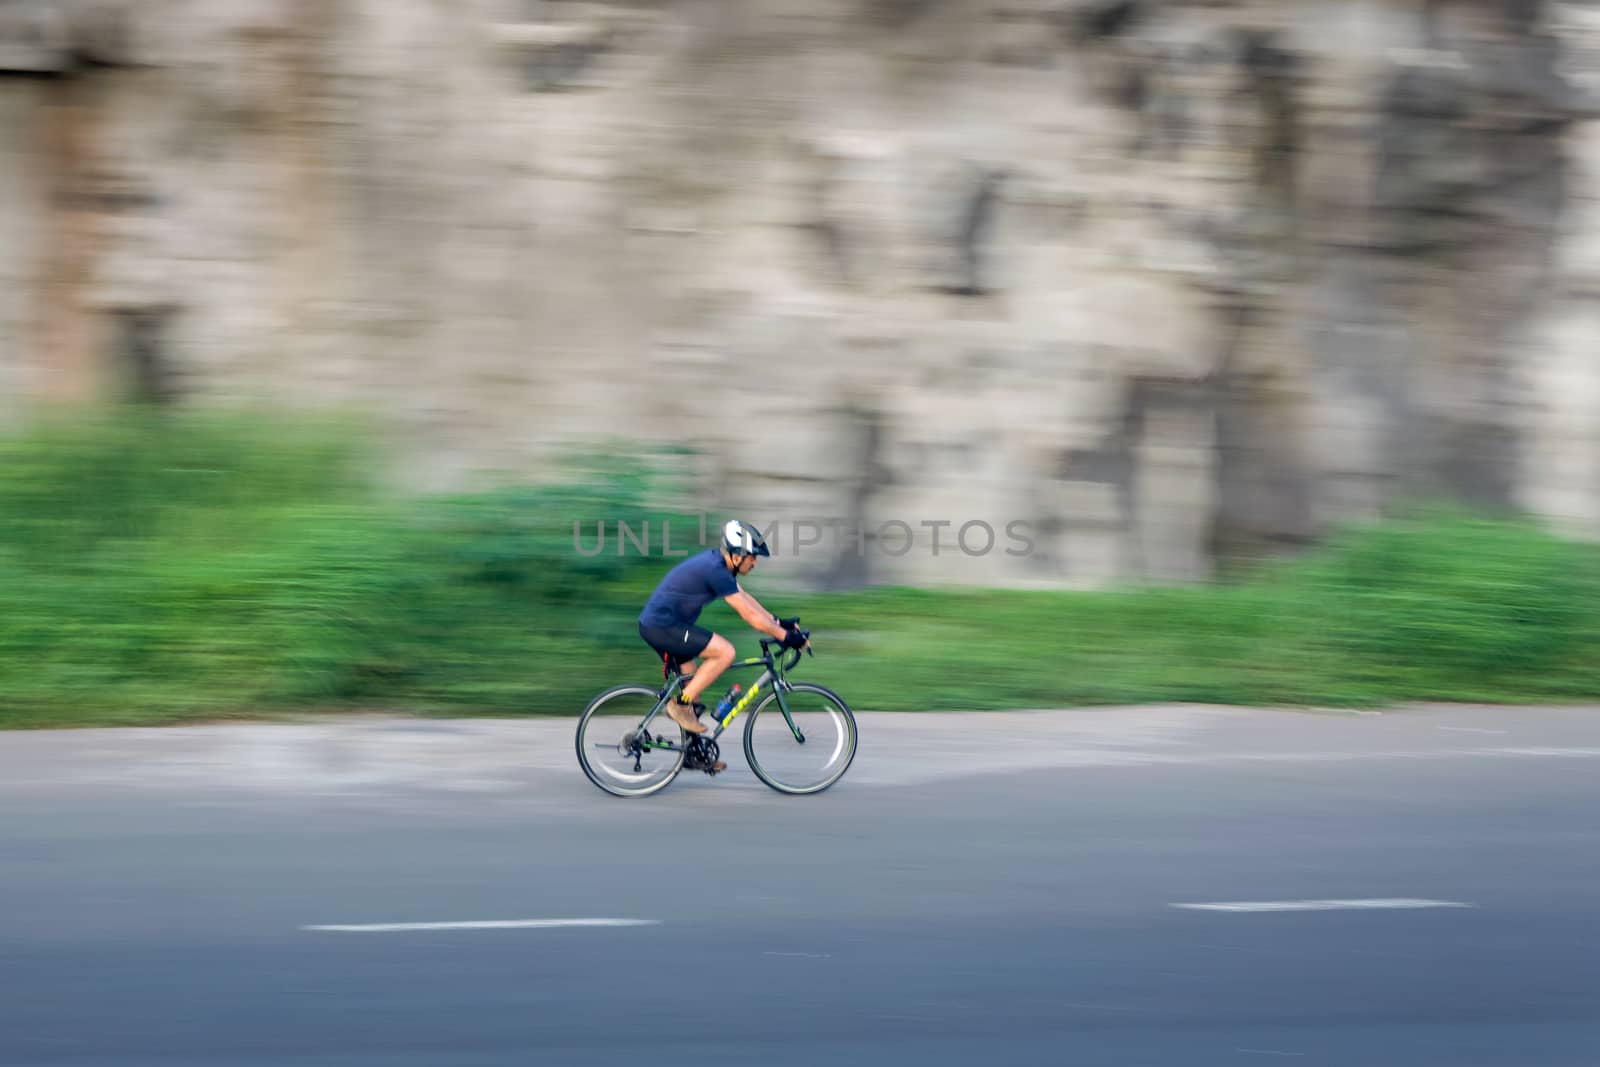 Pune, Maharashtra, India - October 4th, 2017 : Motion blur, panning image of a bicycle rider wearing helmet for safety on a way fo